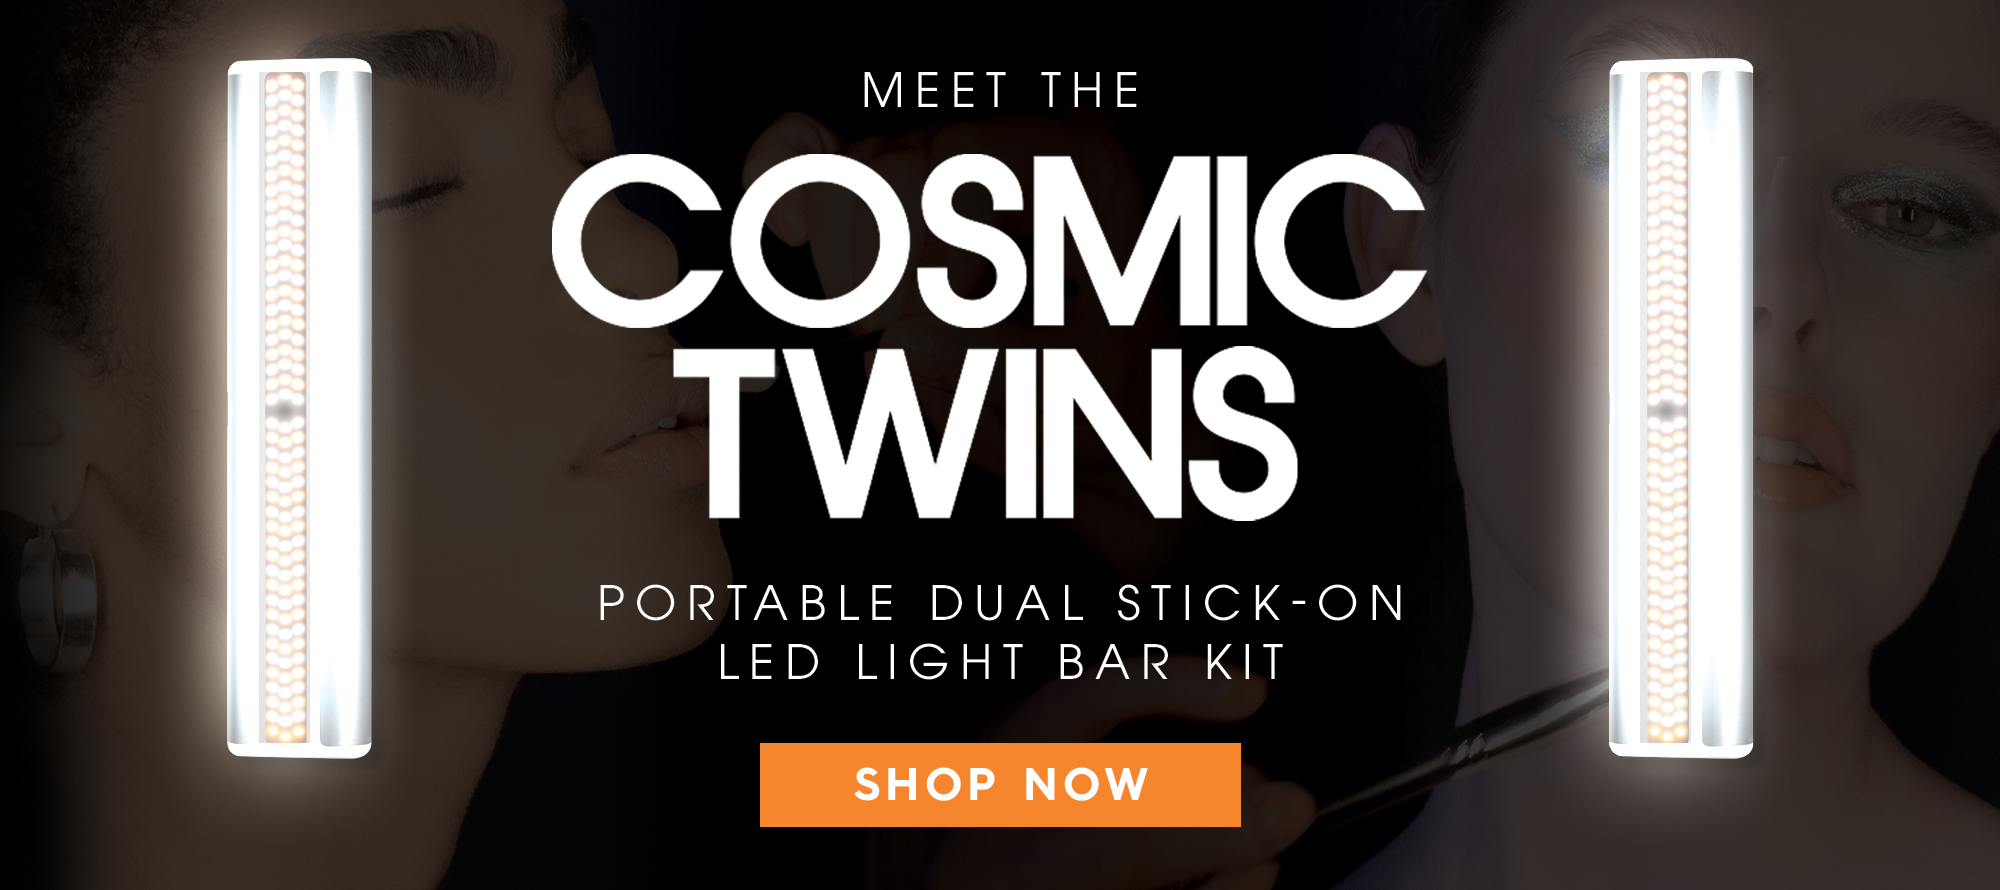 Slim LED light bar, a must-have for makeup and vanity setups - Cosmic Twins, perfect for content creation and user-generated content.